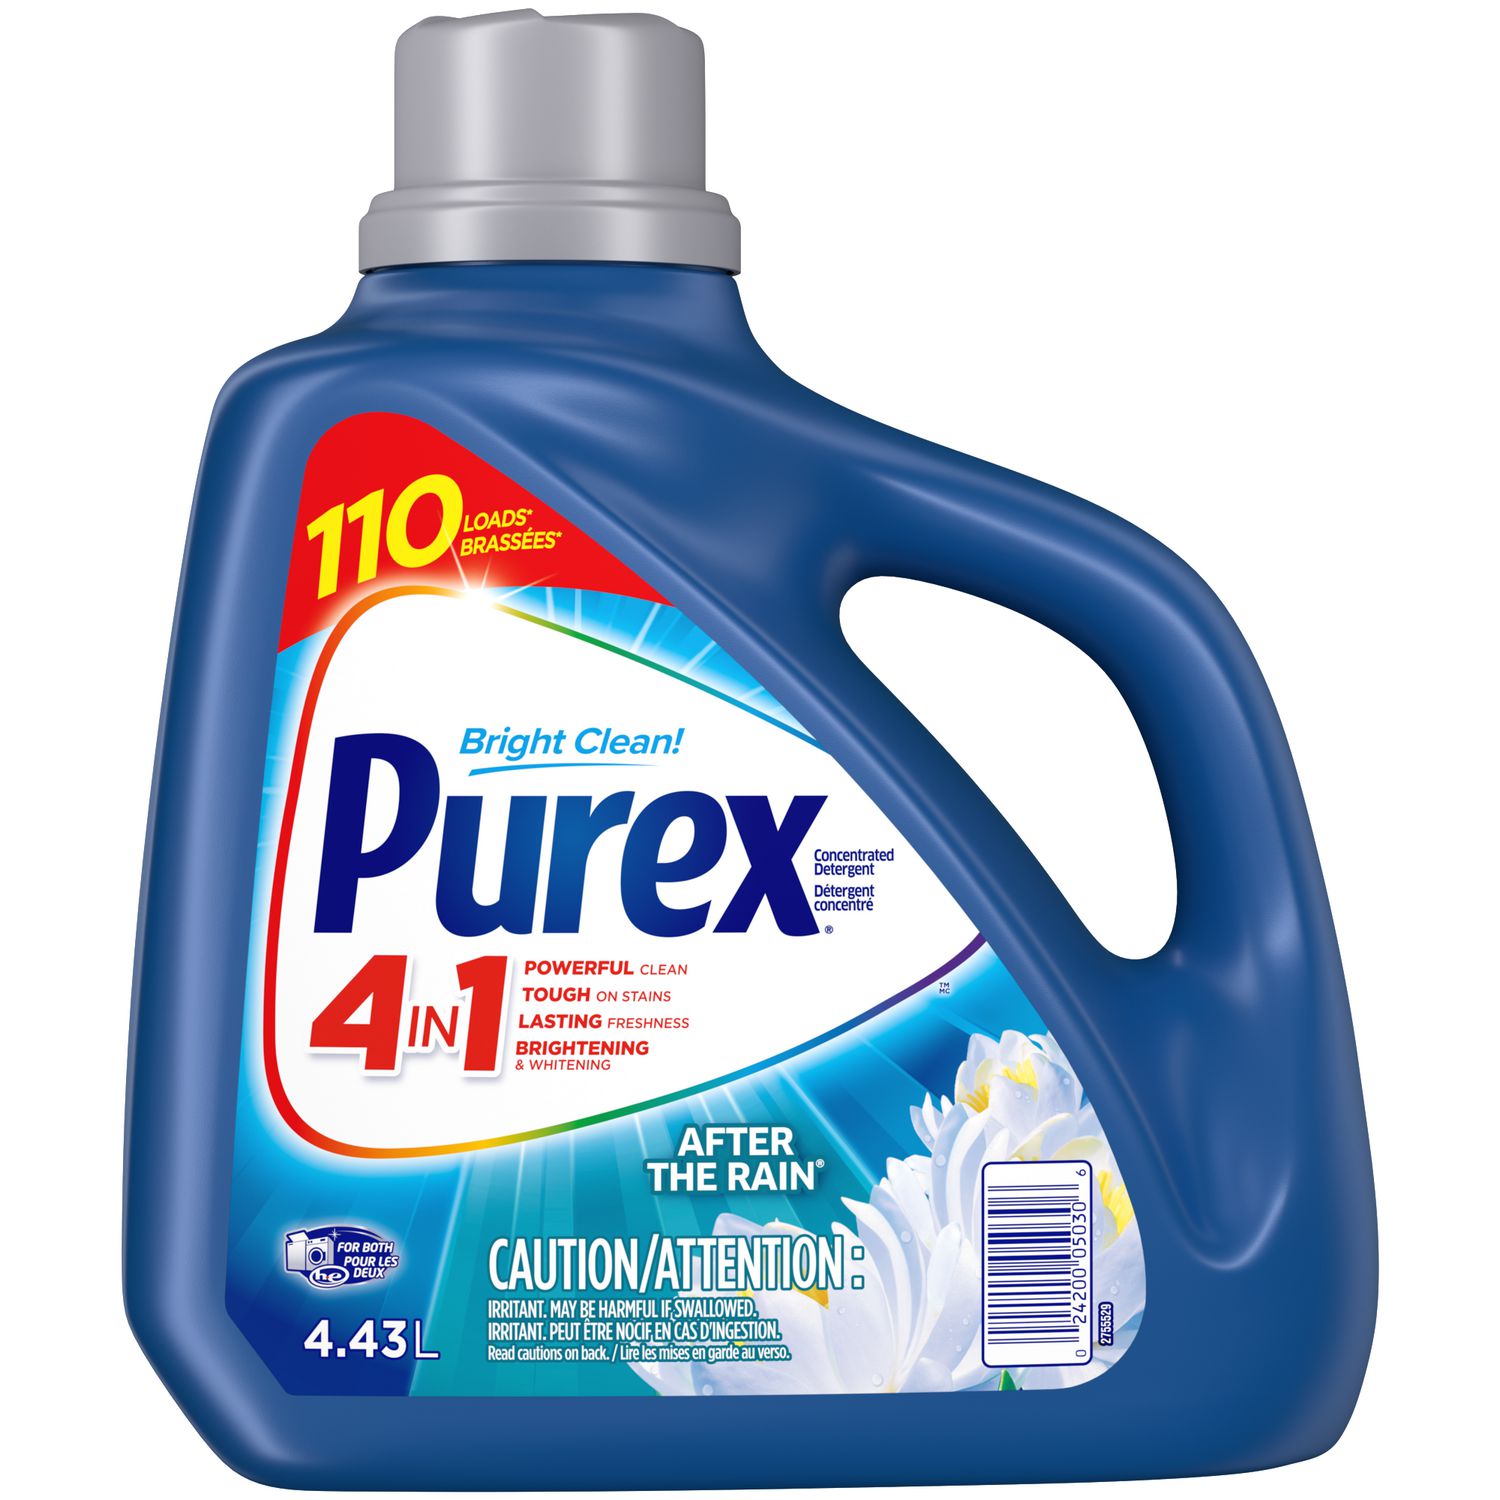 Purex in Liquid Laundry Concentrated Detergent, After The Rain, 4.43L,  110 Loads